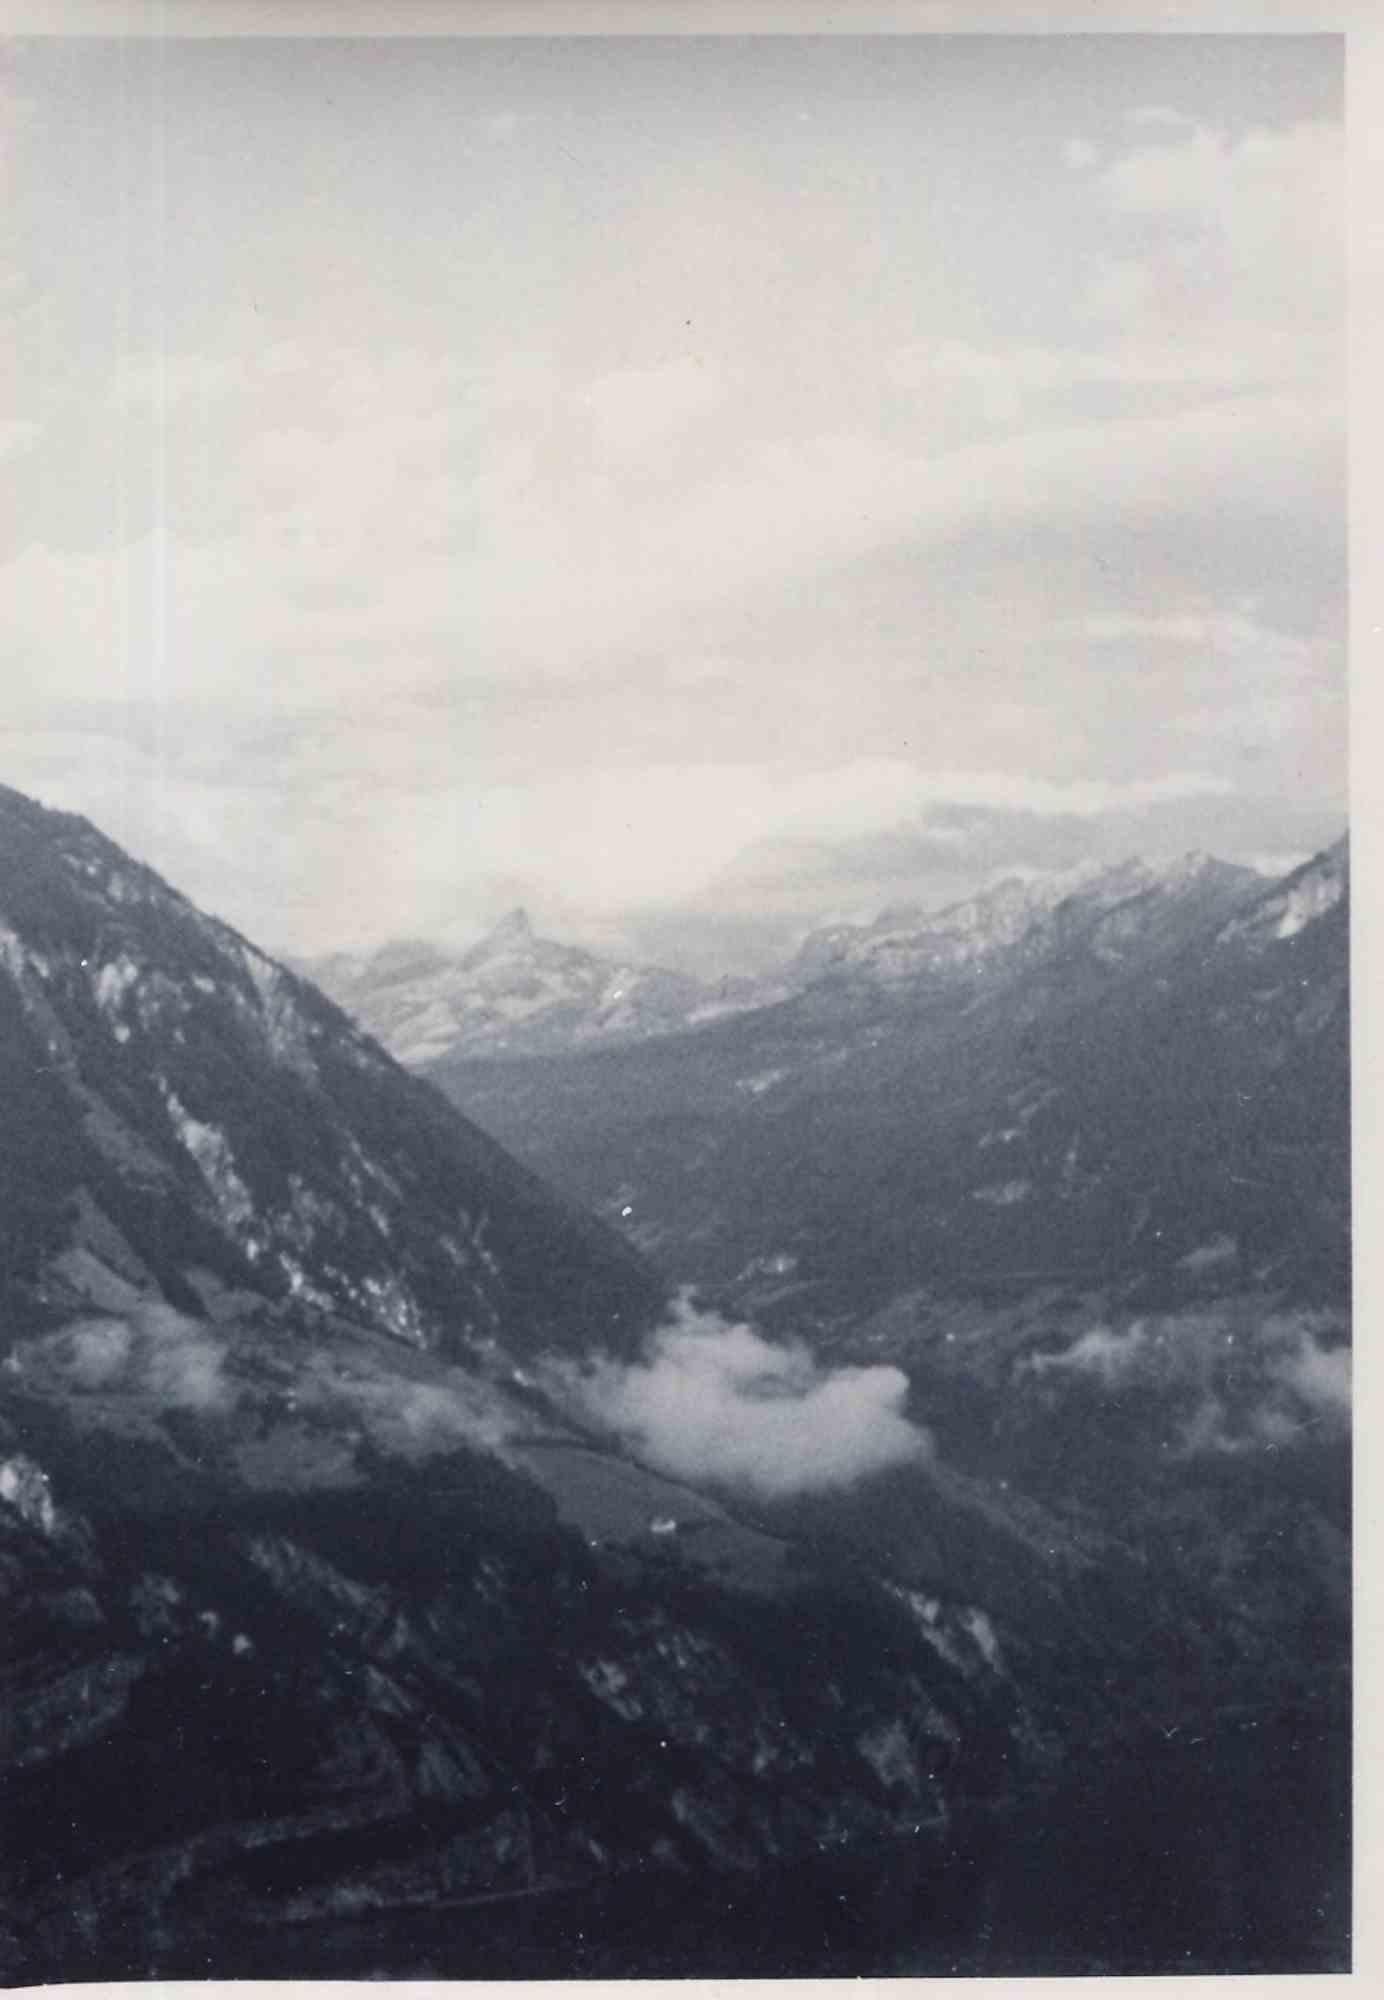 Unknown Landscape Photograph - Old days Photo - Foggy Mountain - Vintage Photo - Early 20th Century